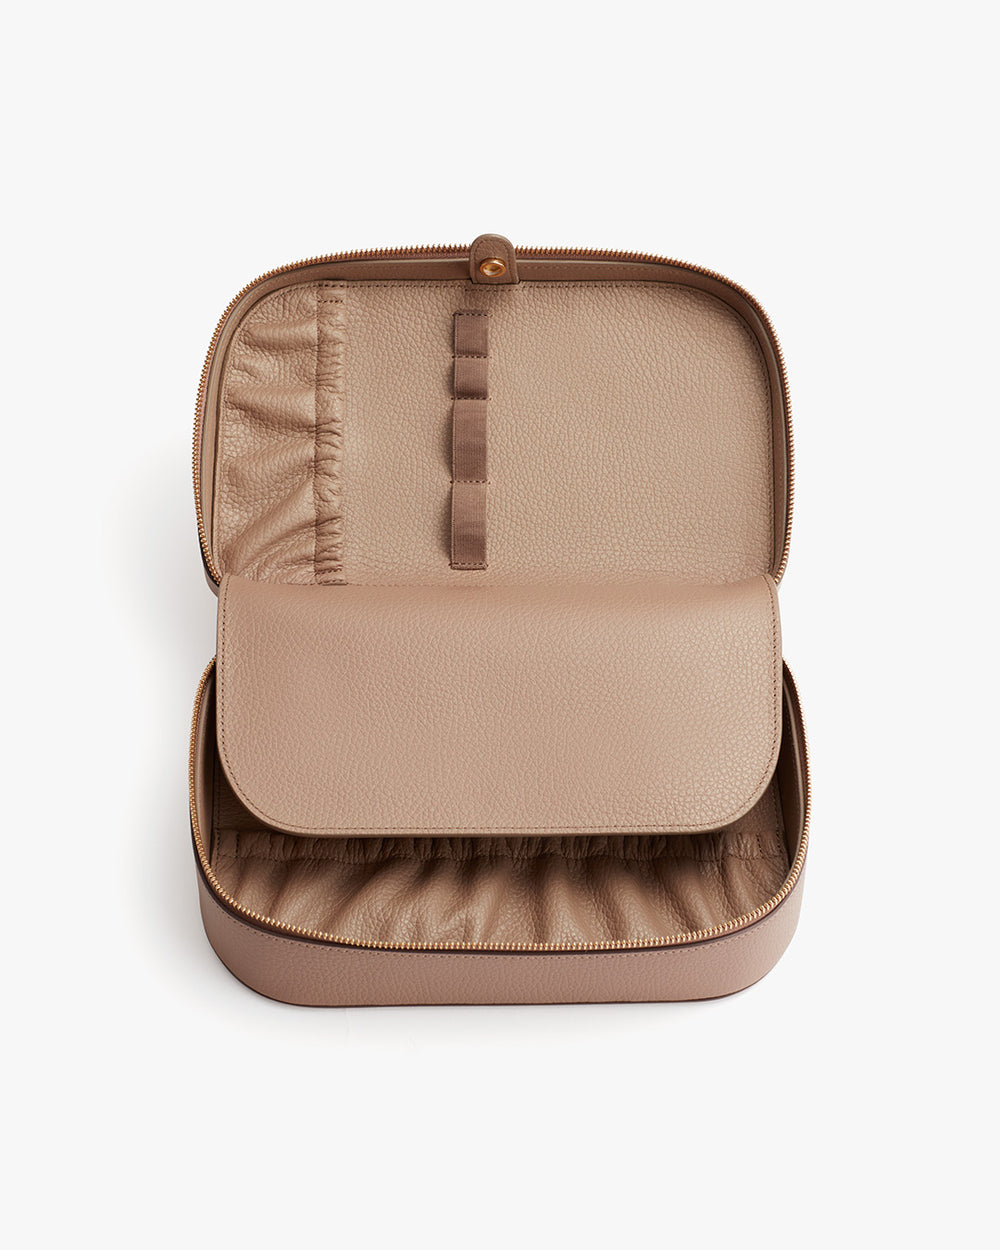 Open travel organizer with compartments and zipper closure.